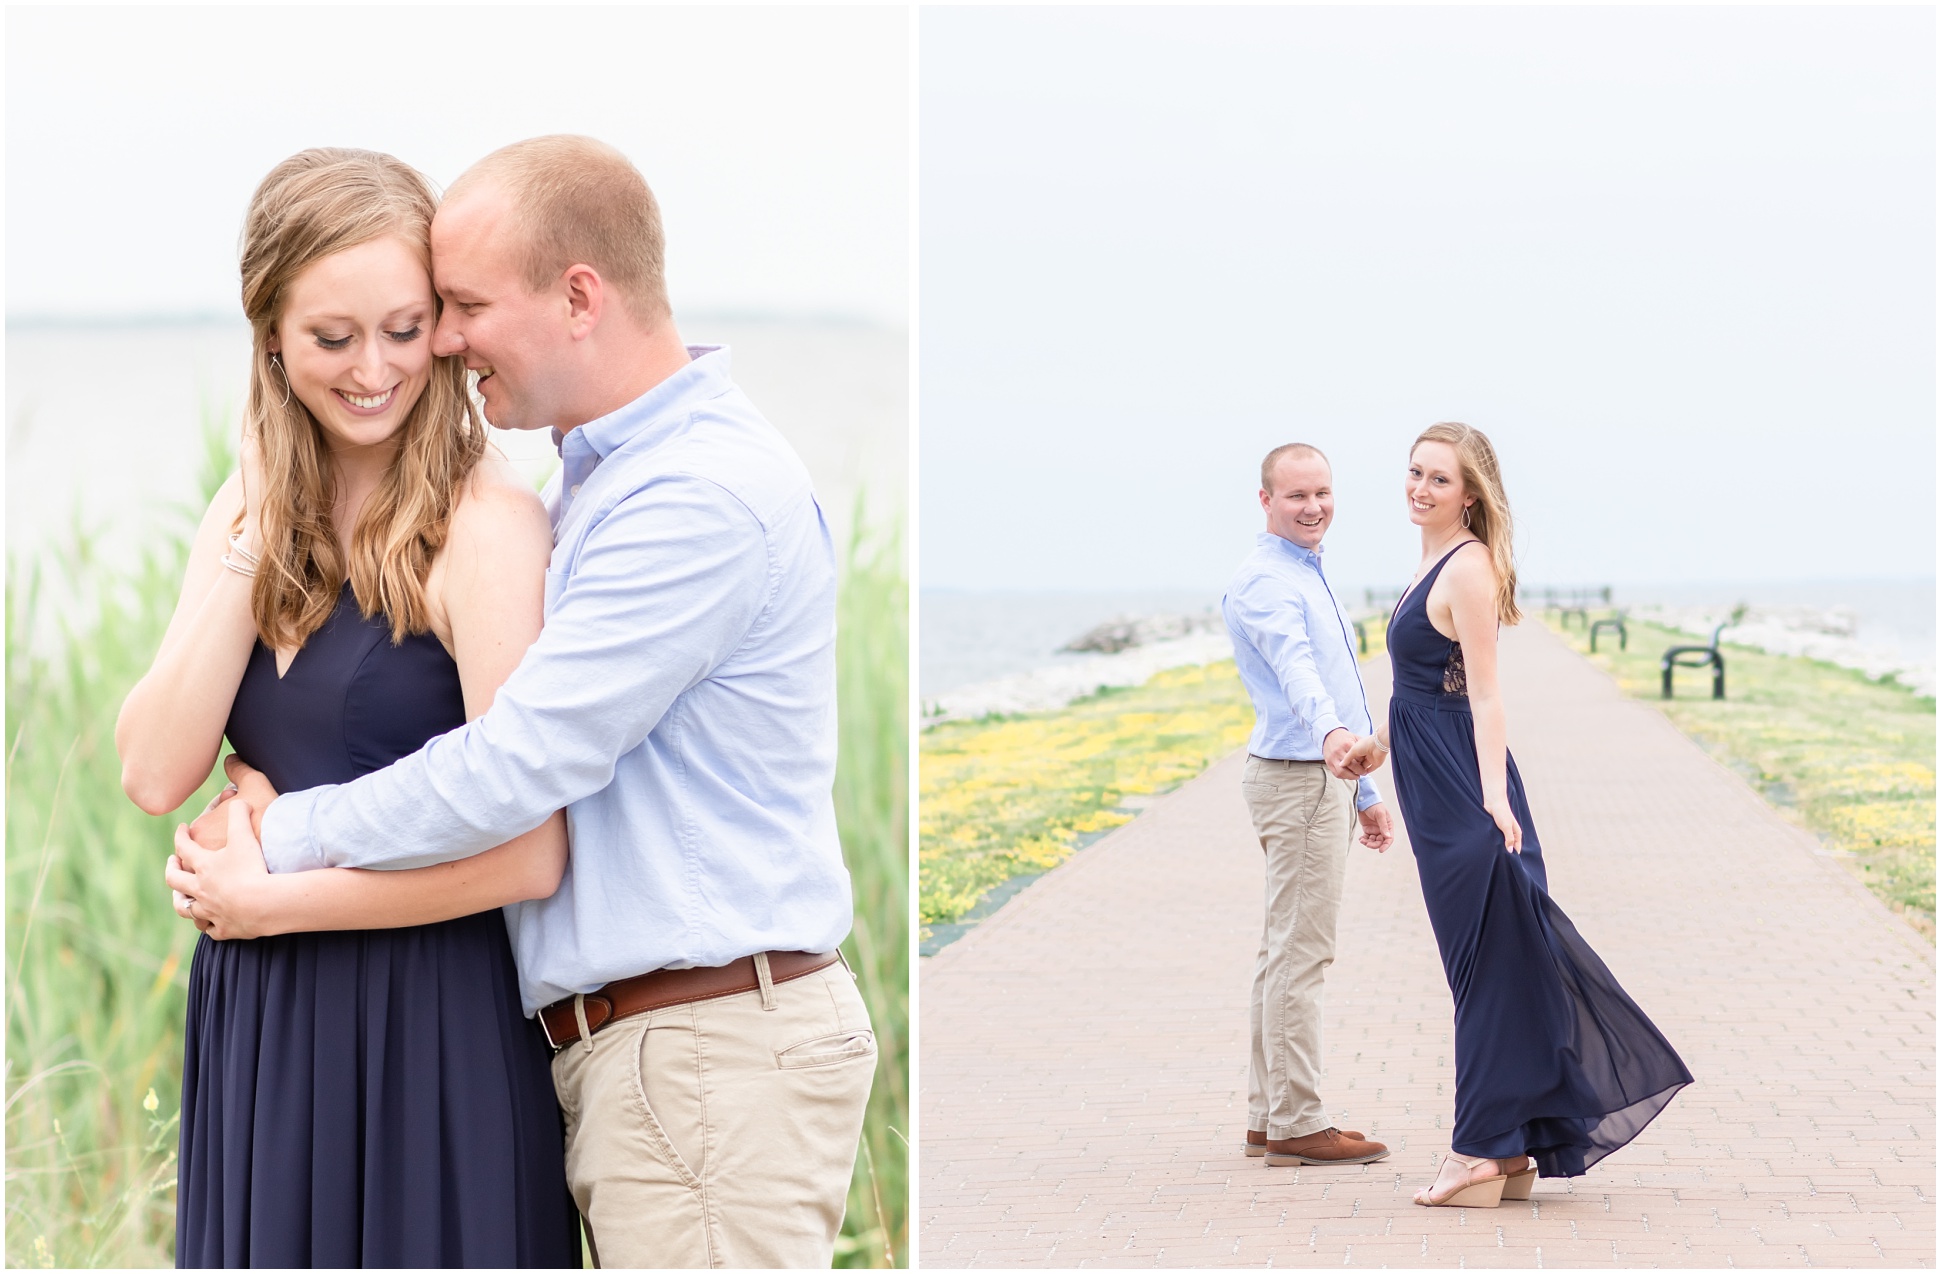 Two Photographs. Left: Man has his arms wrapped around his bride-to-be and his nose is nuzzled into her temple. Right: Man is leading bride-to-be down the pier